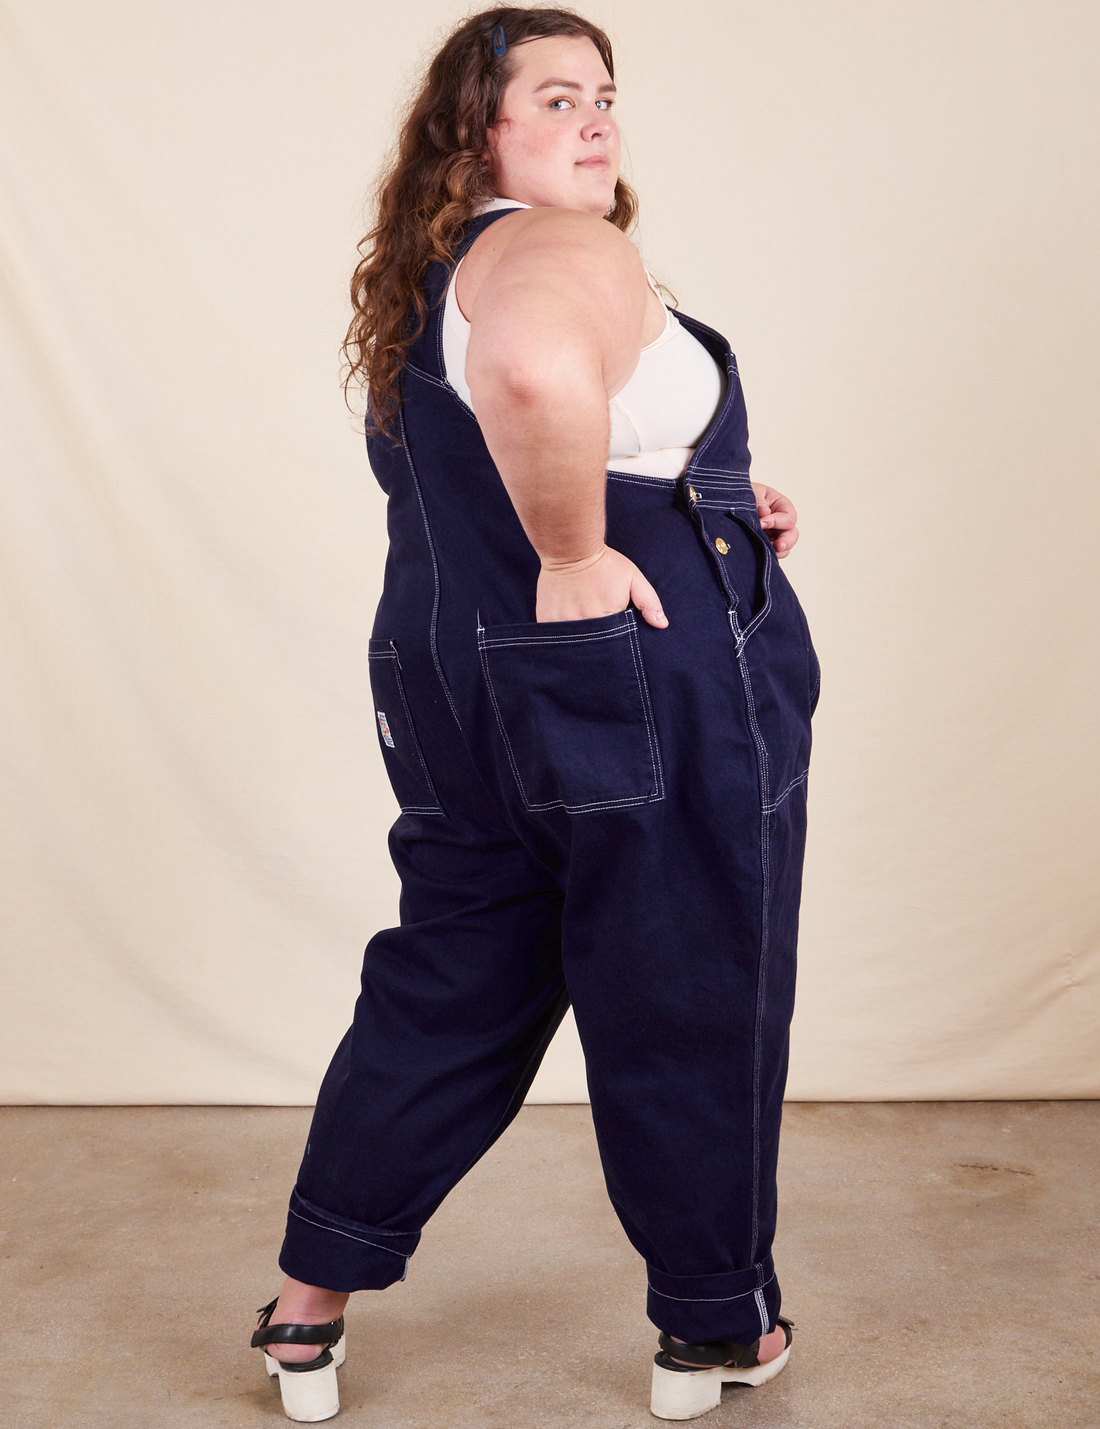 Original Overalls in Navy Blue back view on Mara